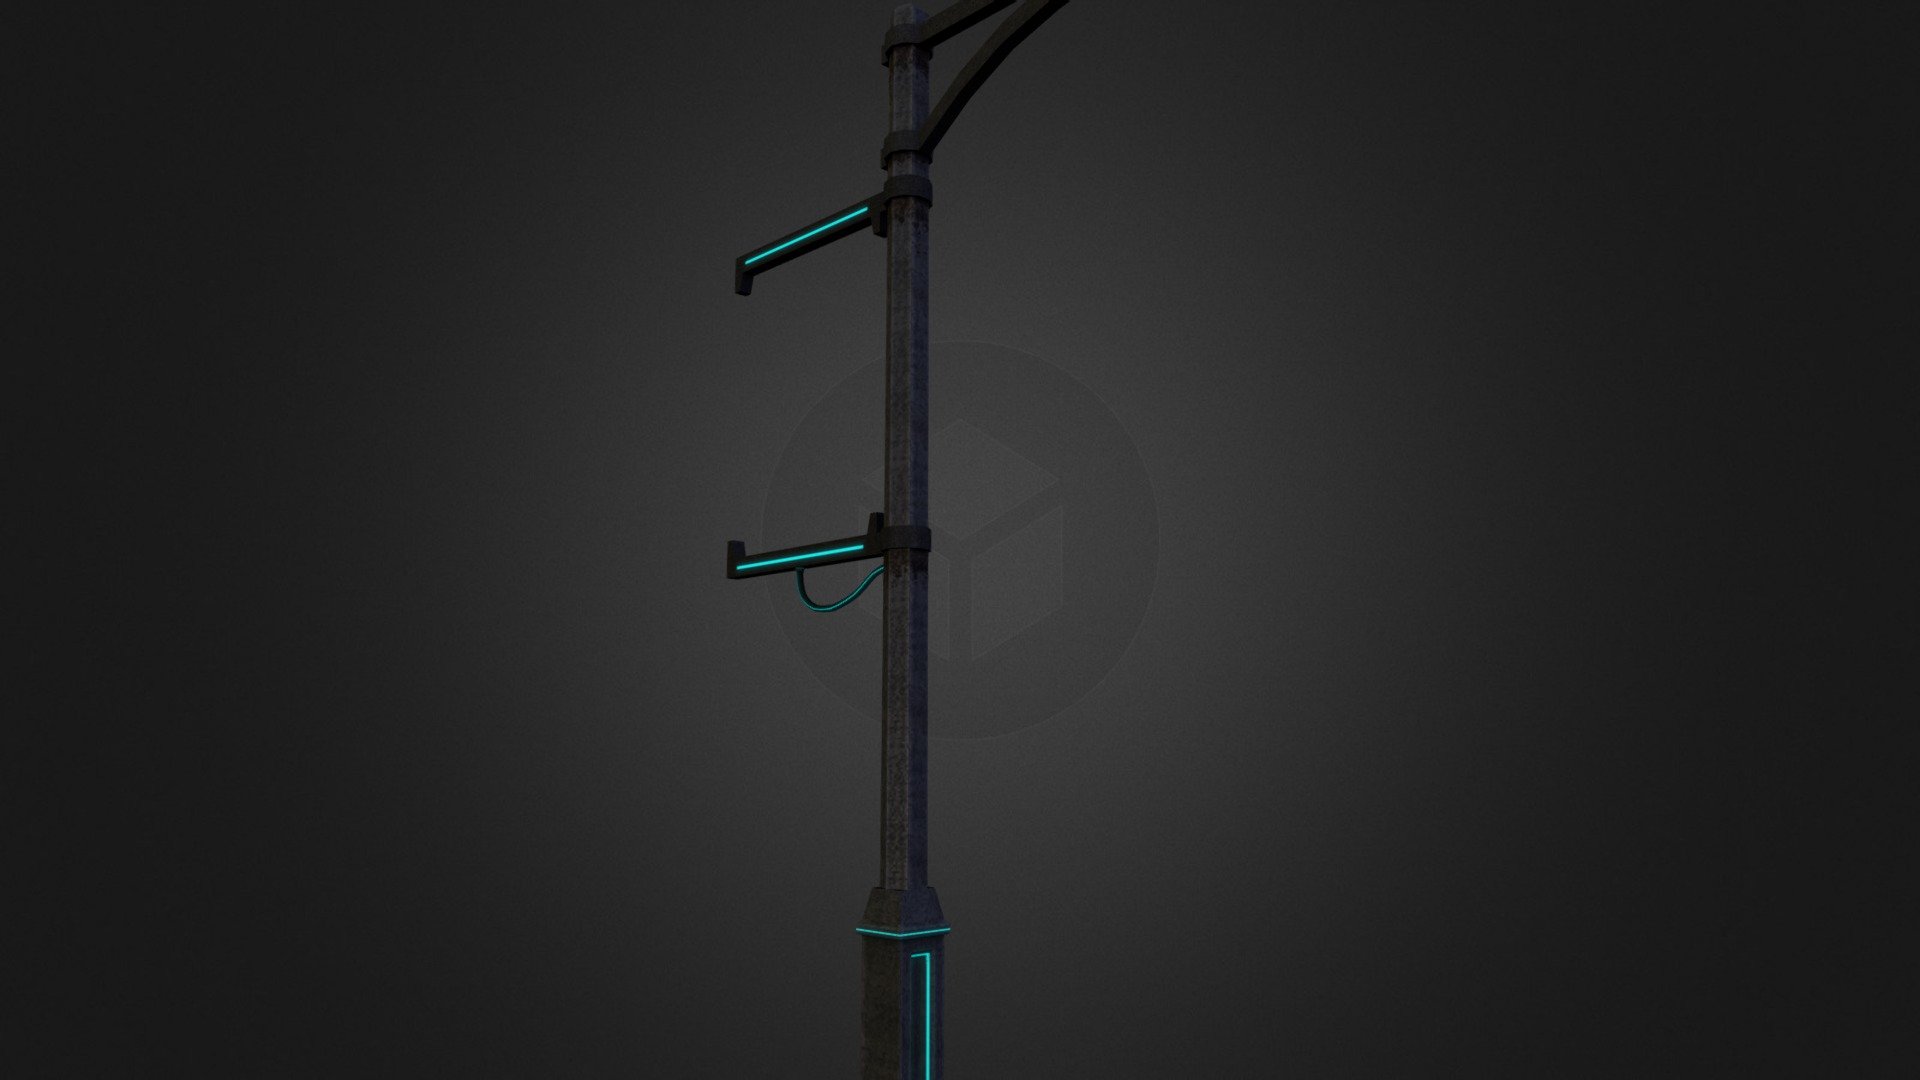 This is another model for my futuristic environment I am developing in UDK, The brackets coming off the model are for adverts. 
Poly count: 494
Texture size: 512x512 - Futuristic Lamp Post - 3D model by stephenjames18 3d model